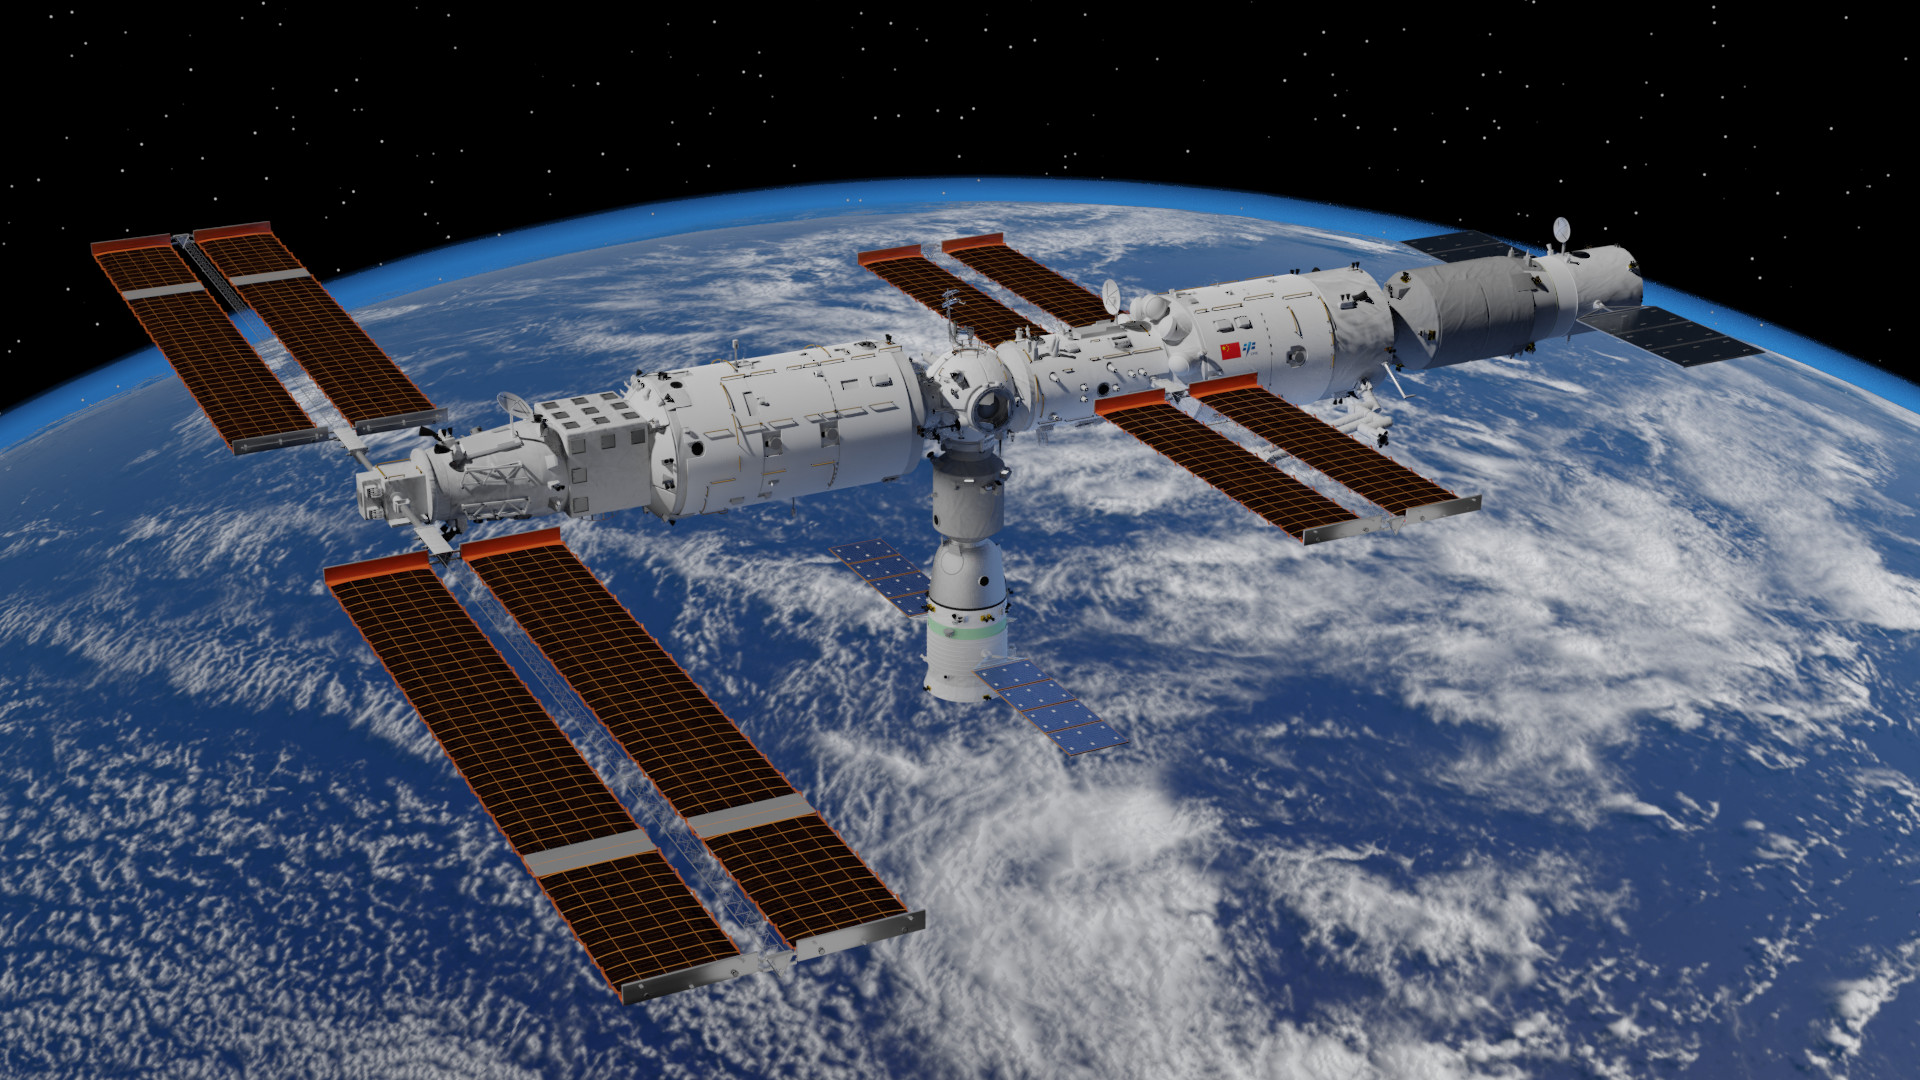 A rendering of the Tiangong Space Station. Wikimedia Commons.